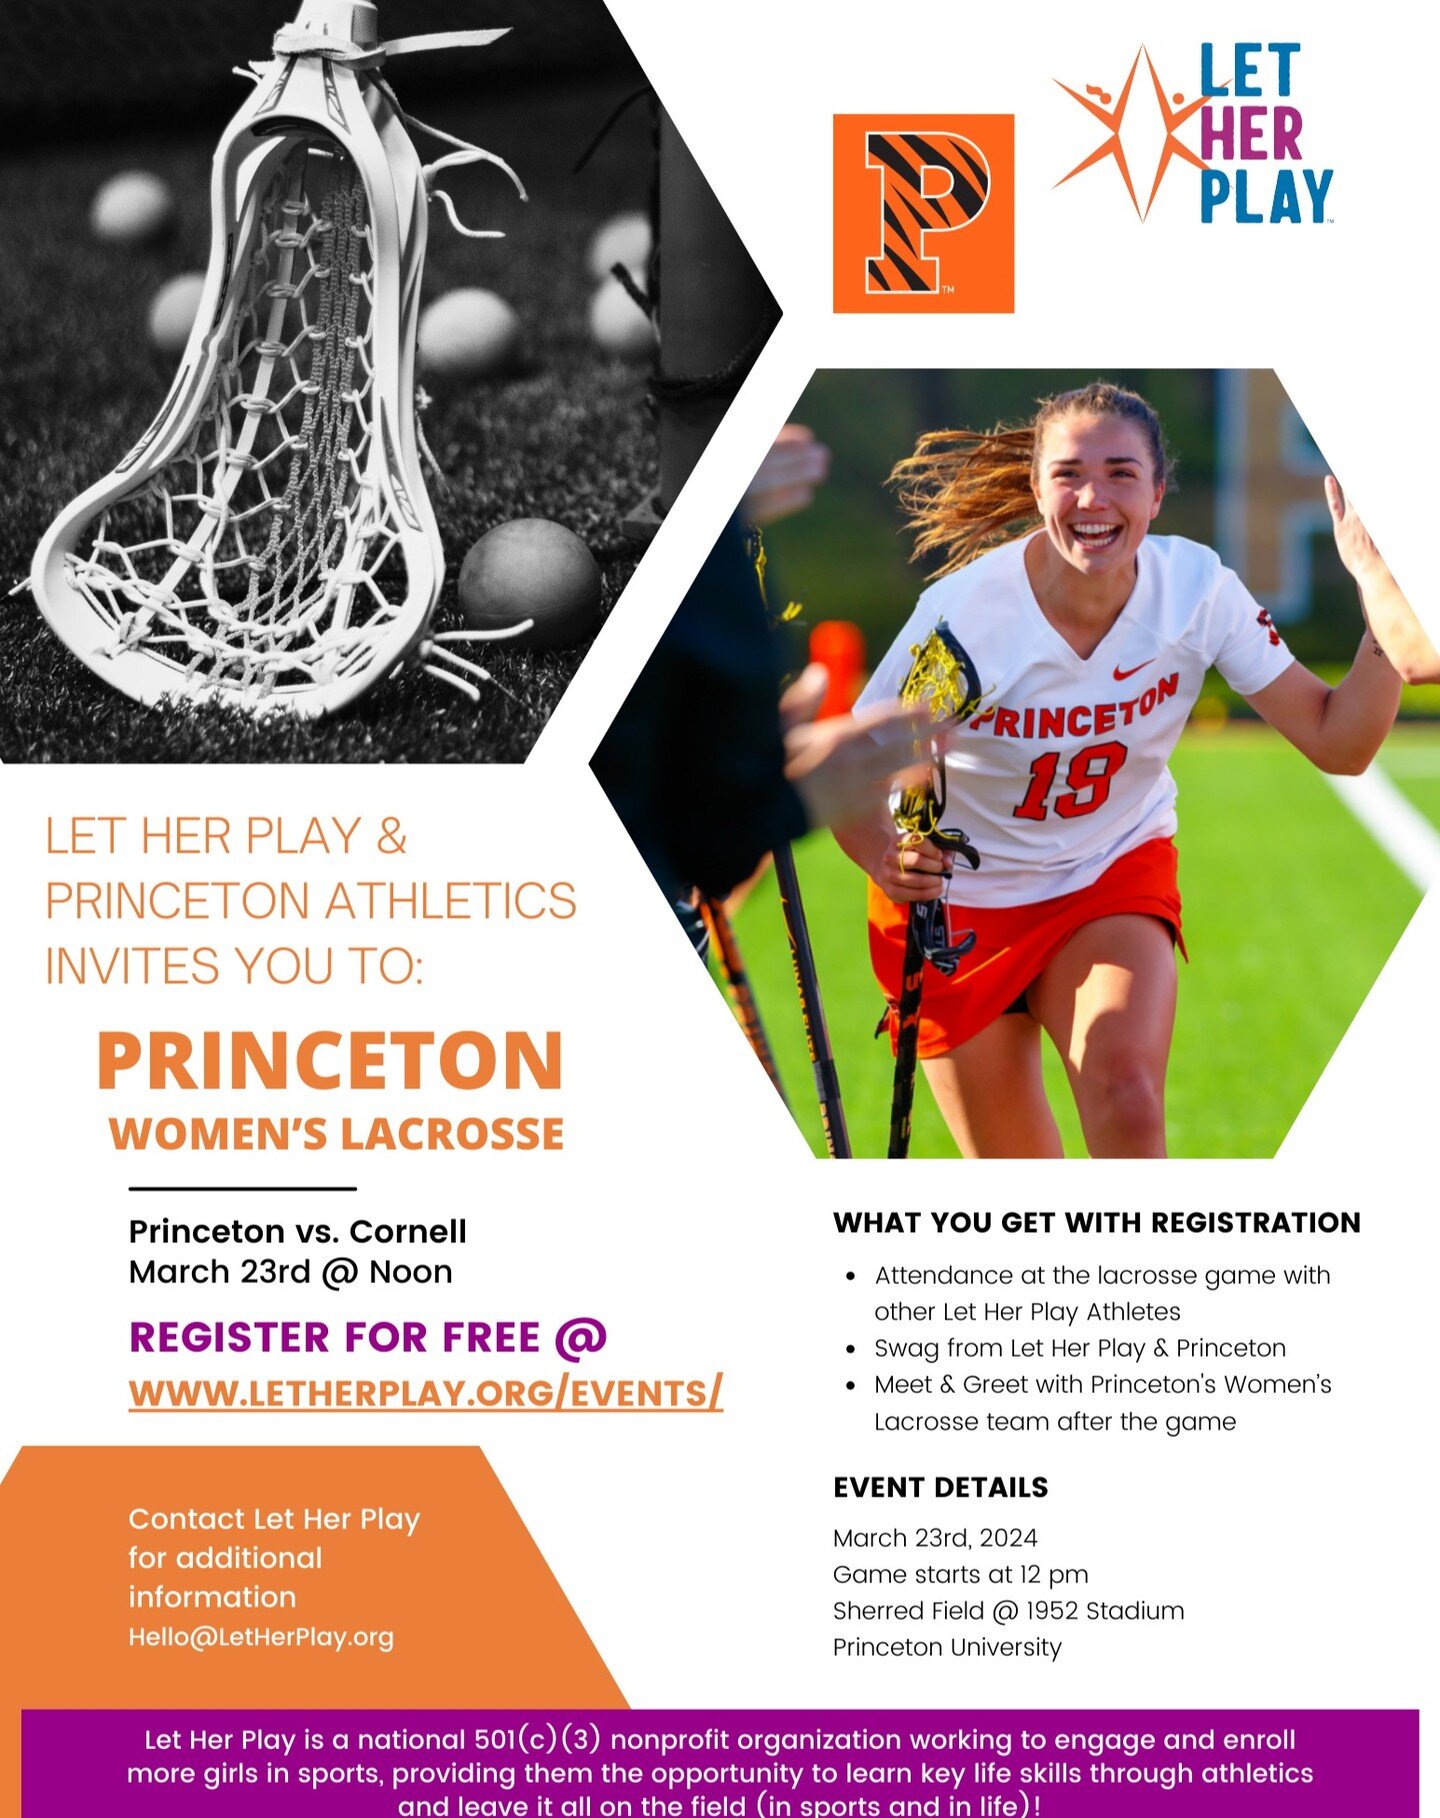 Join Let Her Play and @princetonathletics as @princetonwlax takes on Cornell on Saturday, 3/23 at noon.

Register for FREE with Let Her Play to attend the game, meet the Princeton team after the game + take home some swag from Let Her Play and Prince